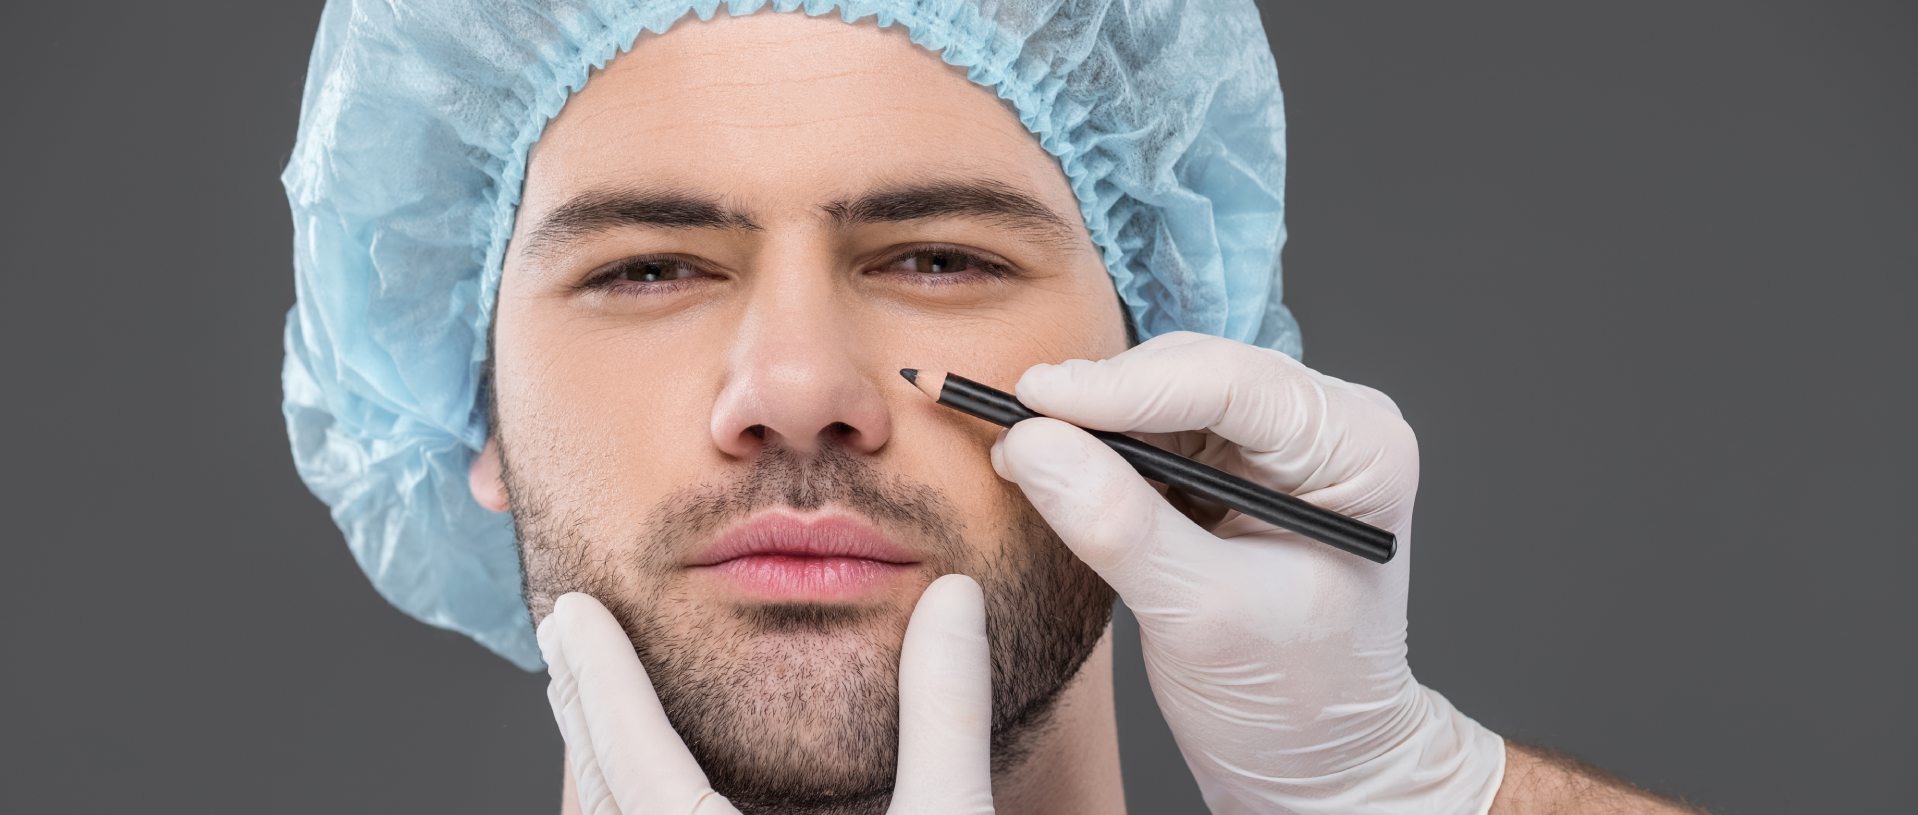 doctor drawing lines for facelifting on handsome man